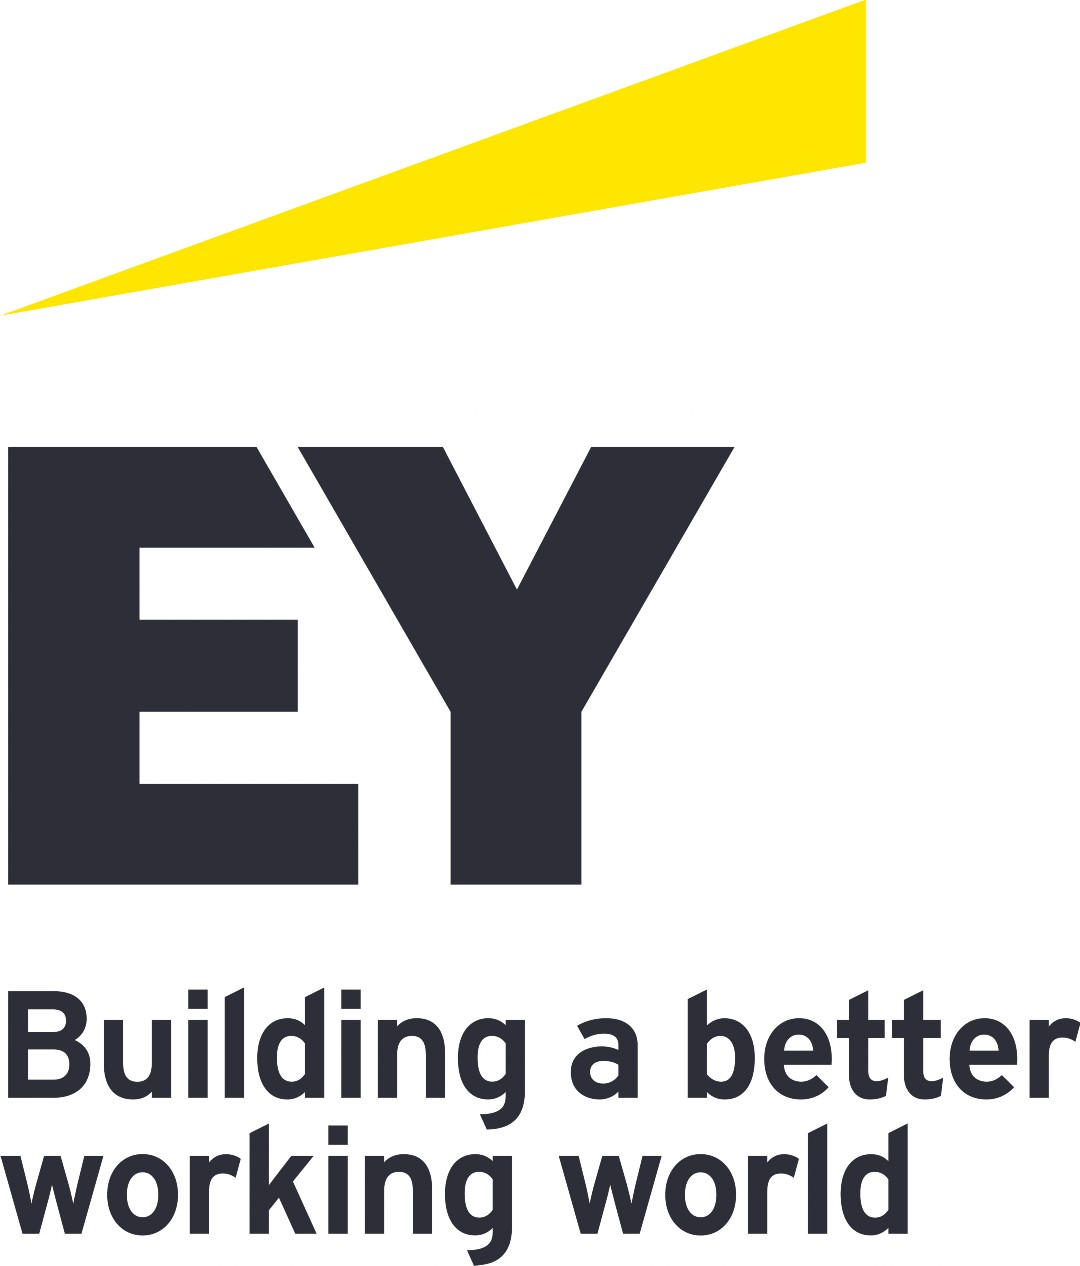 Ernst and young logo